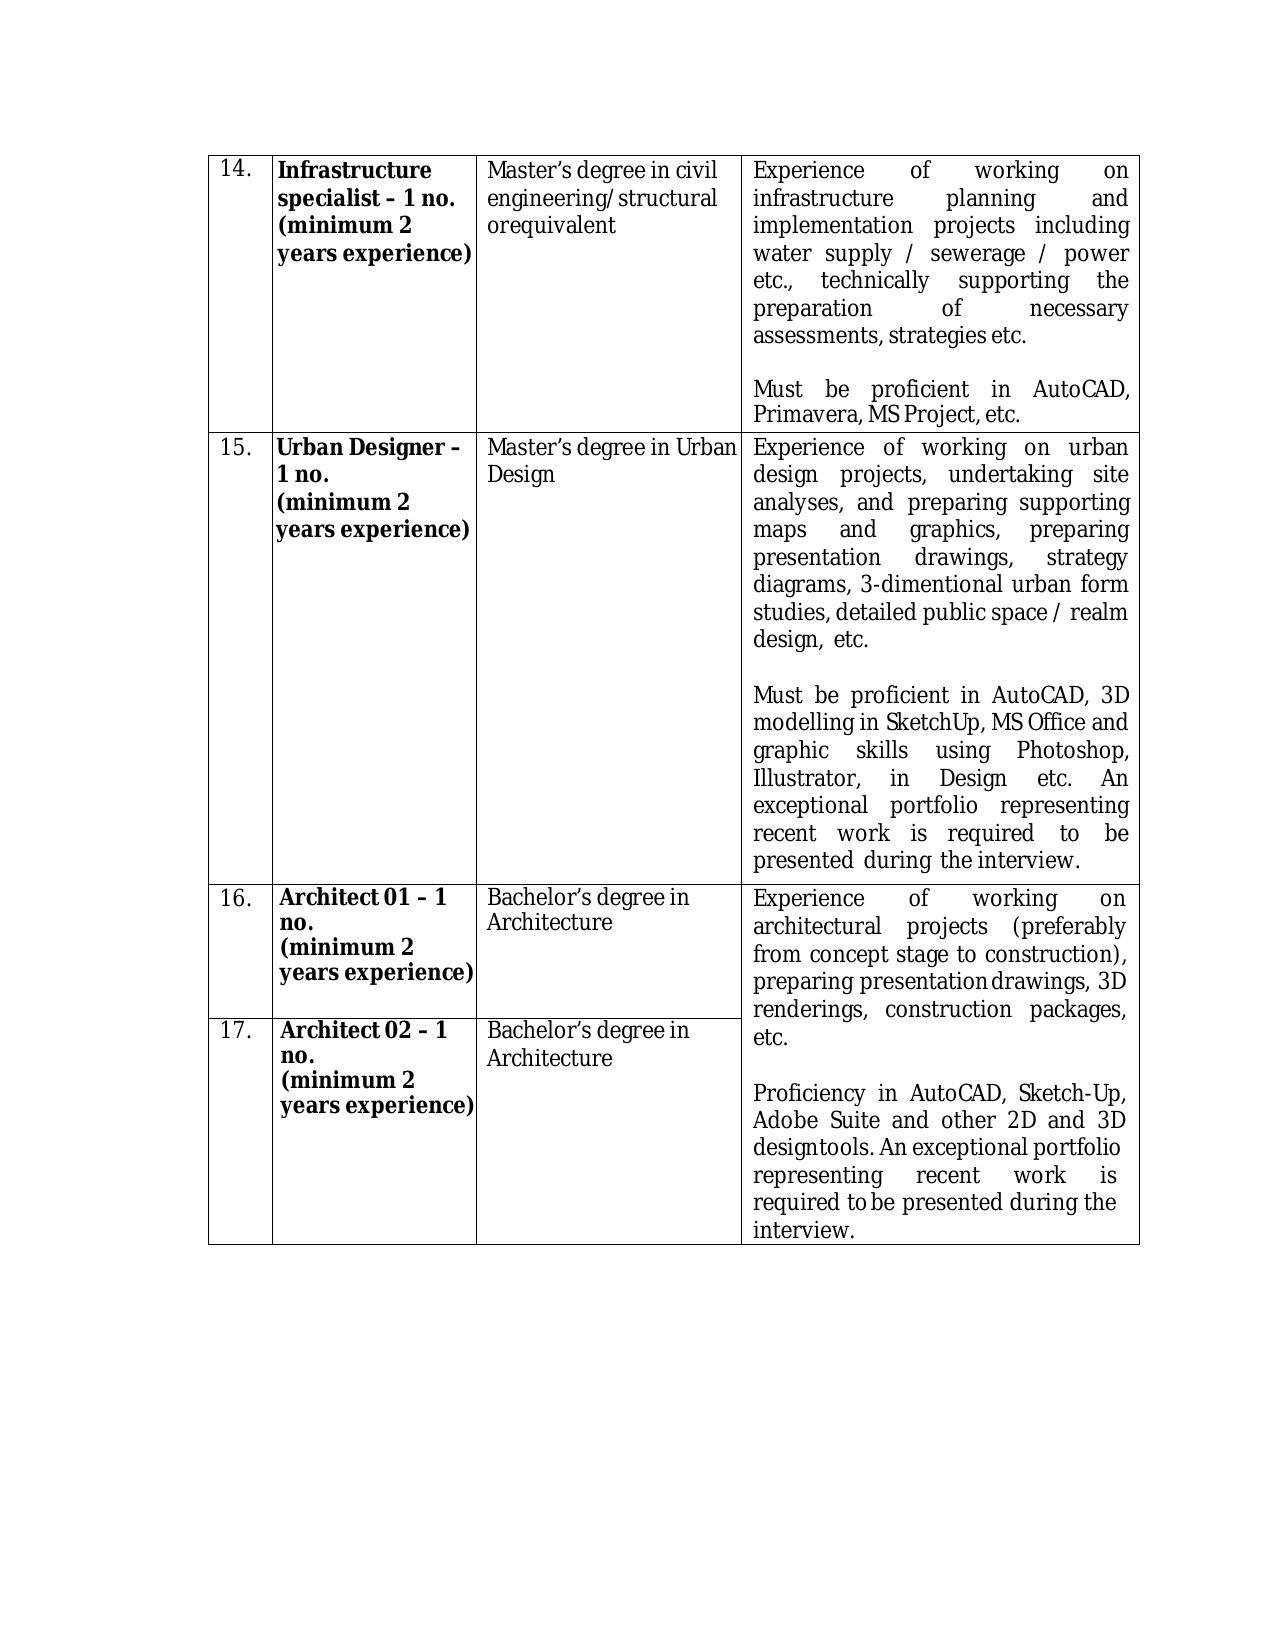 ANIIDCO Invites Application for 18 Environmental Planner, More Vacancies Recruitment 2022 - Page 7